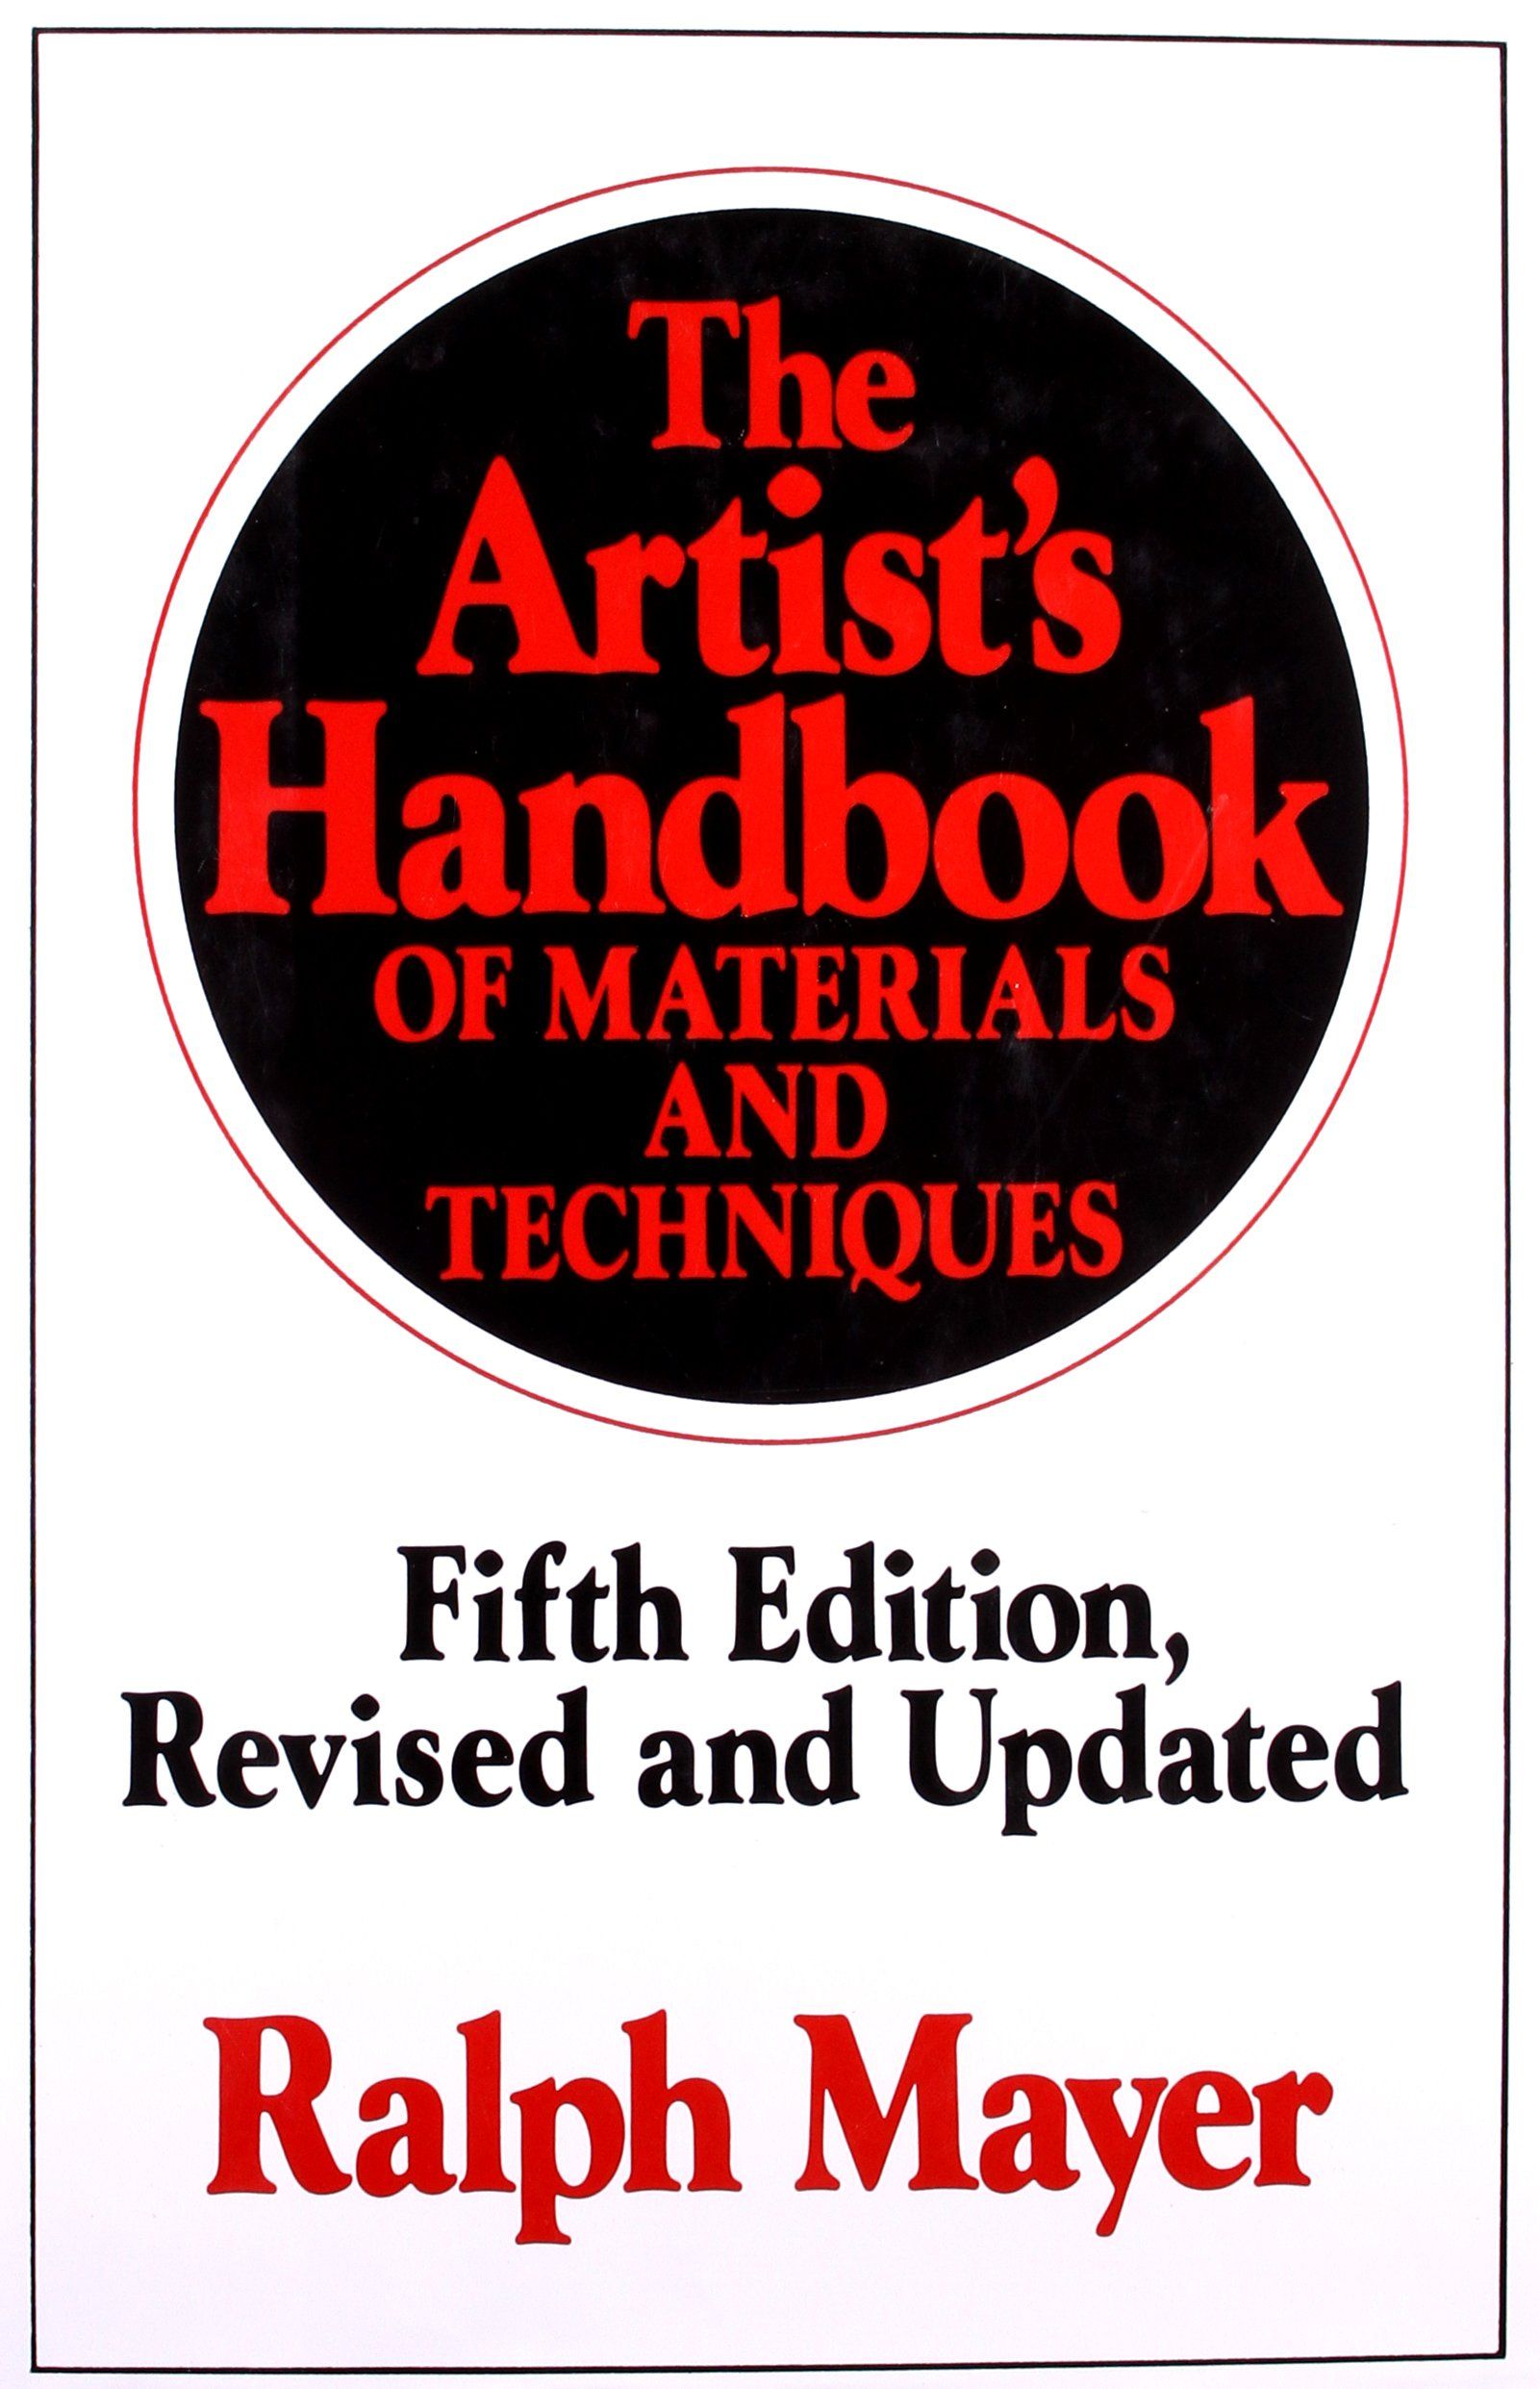 The Artist's Handbook of Materials and Techniques by Ralph Mayer 5th Edition